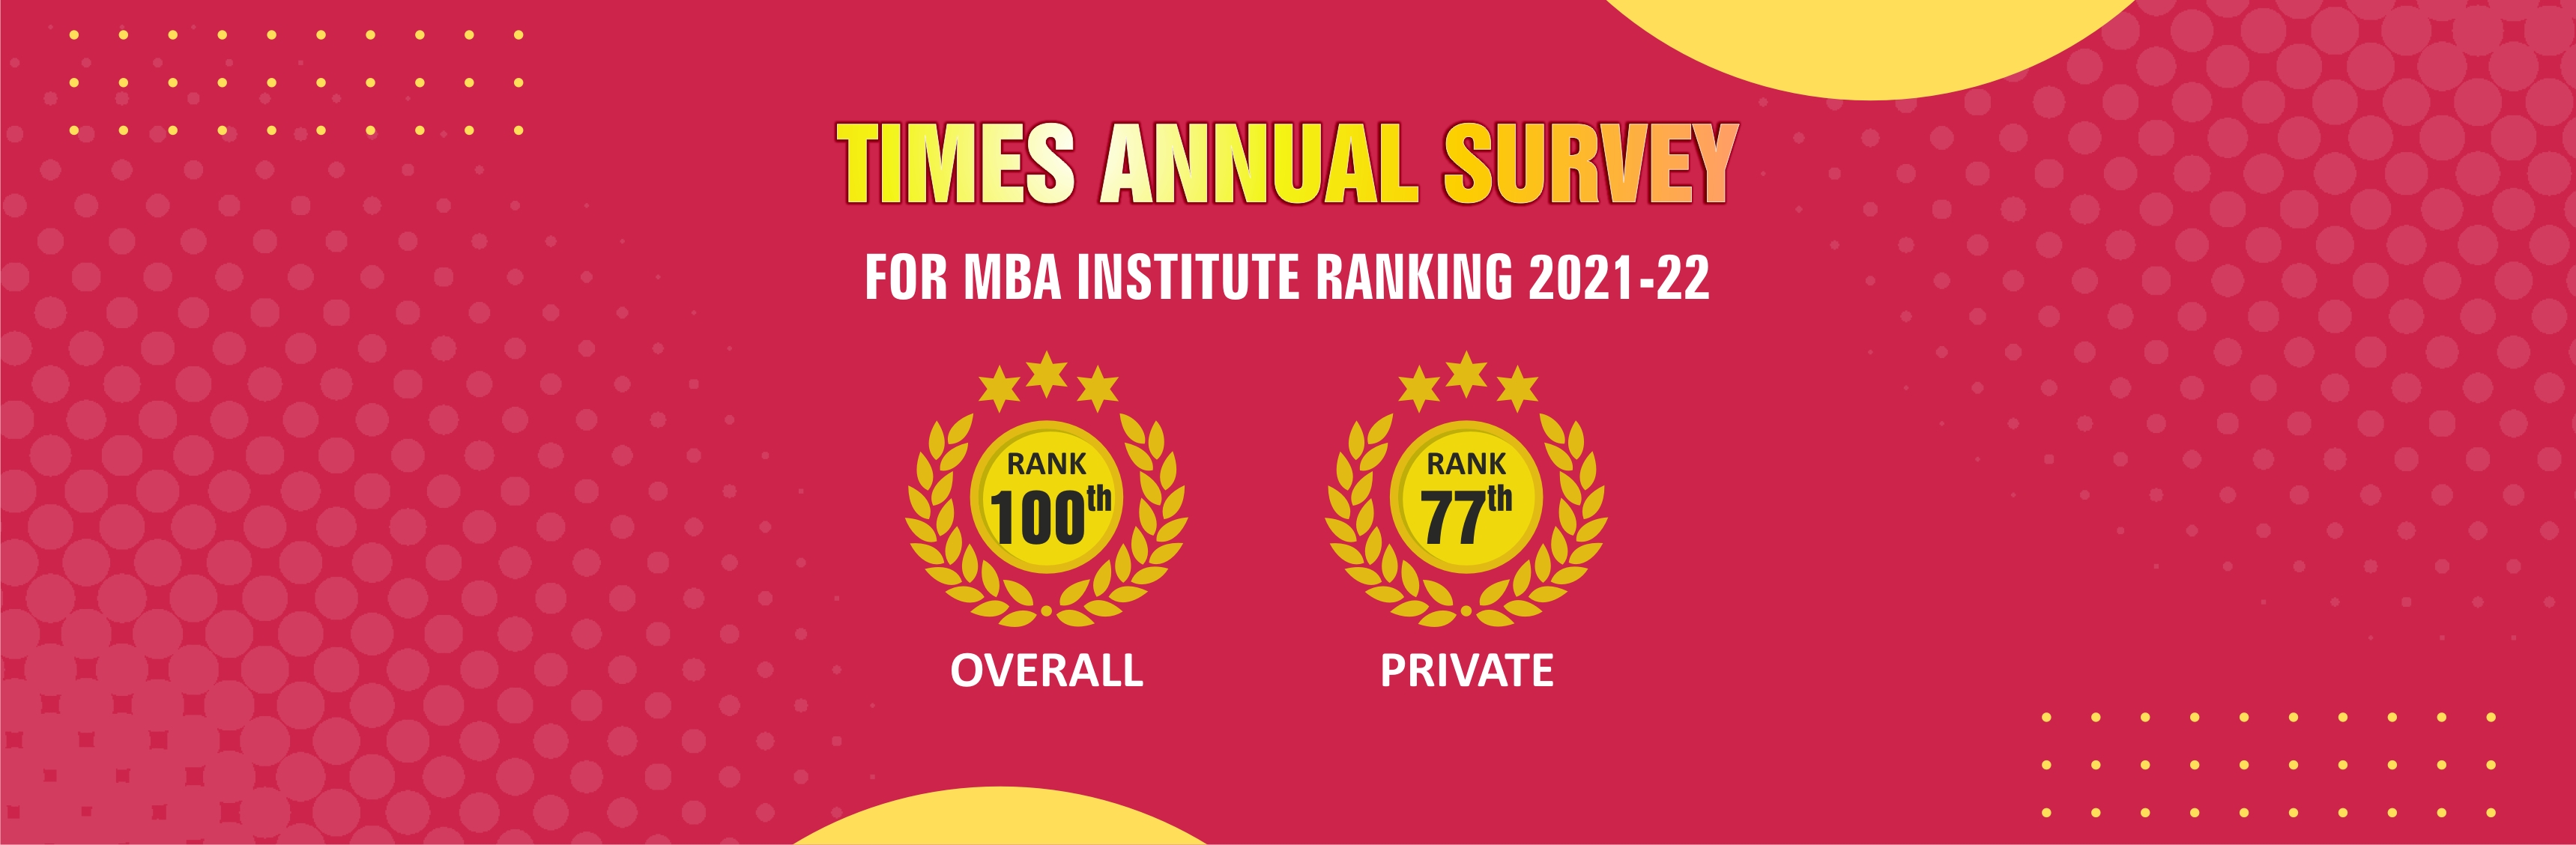 Times-annual-survey-for-MBA